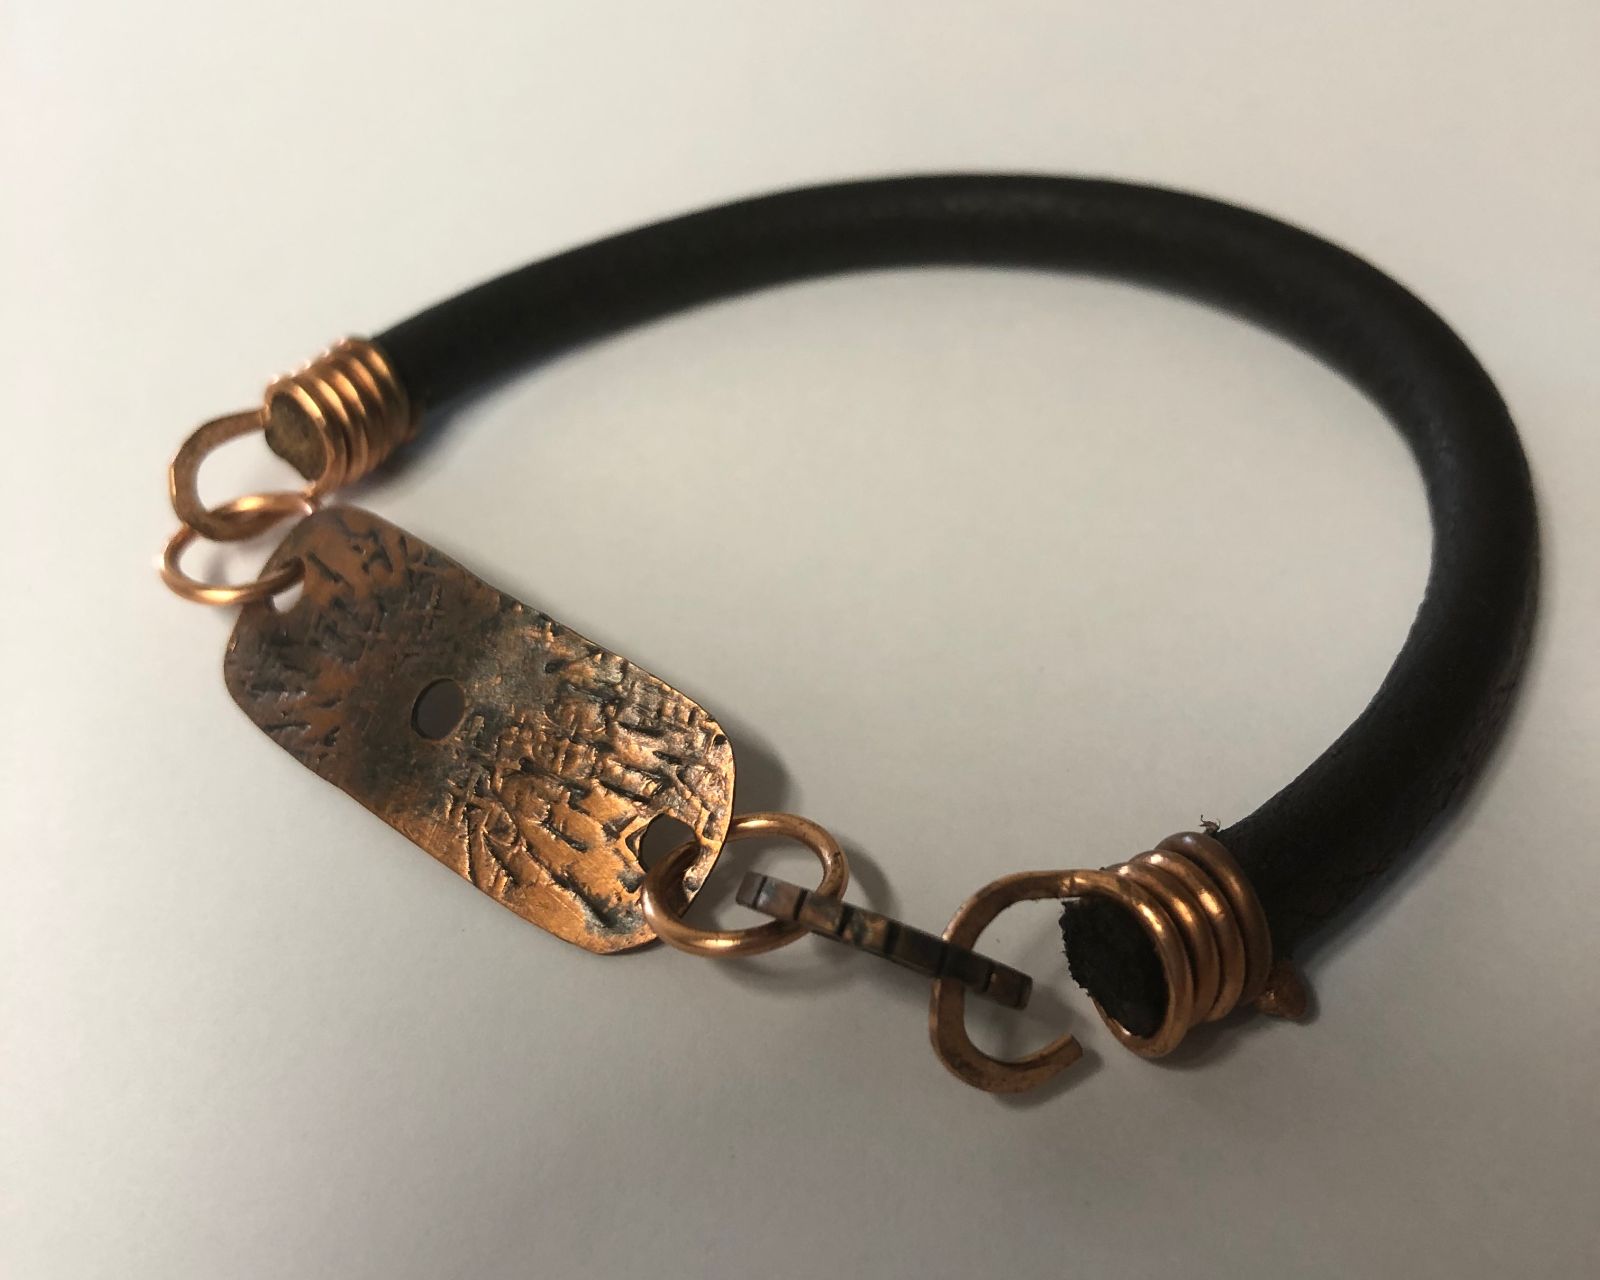 Holiday Art Experience: Create a Copper and Leather Bracelet